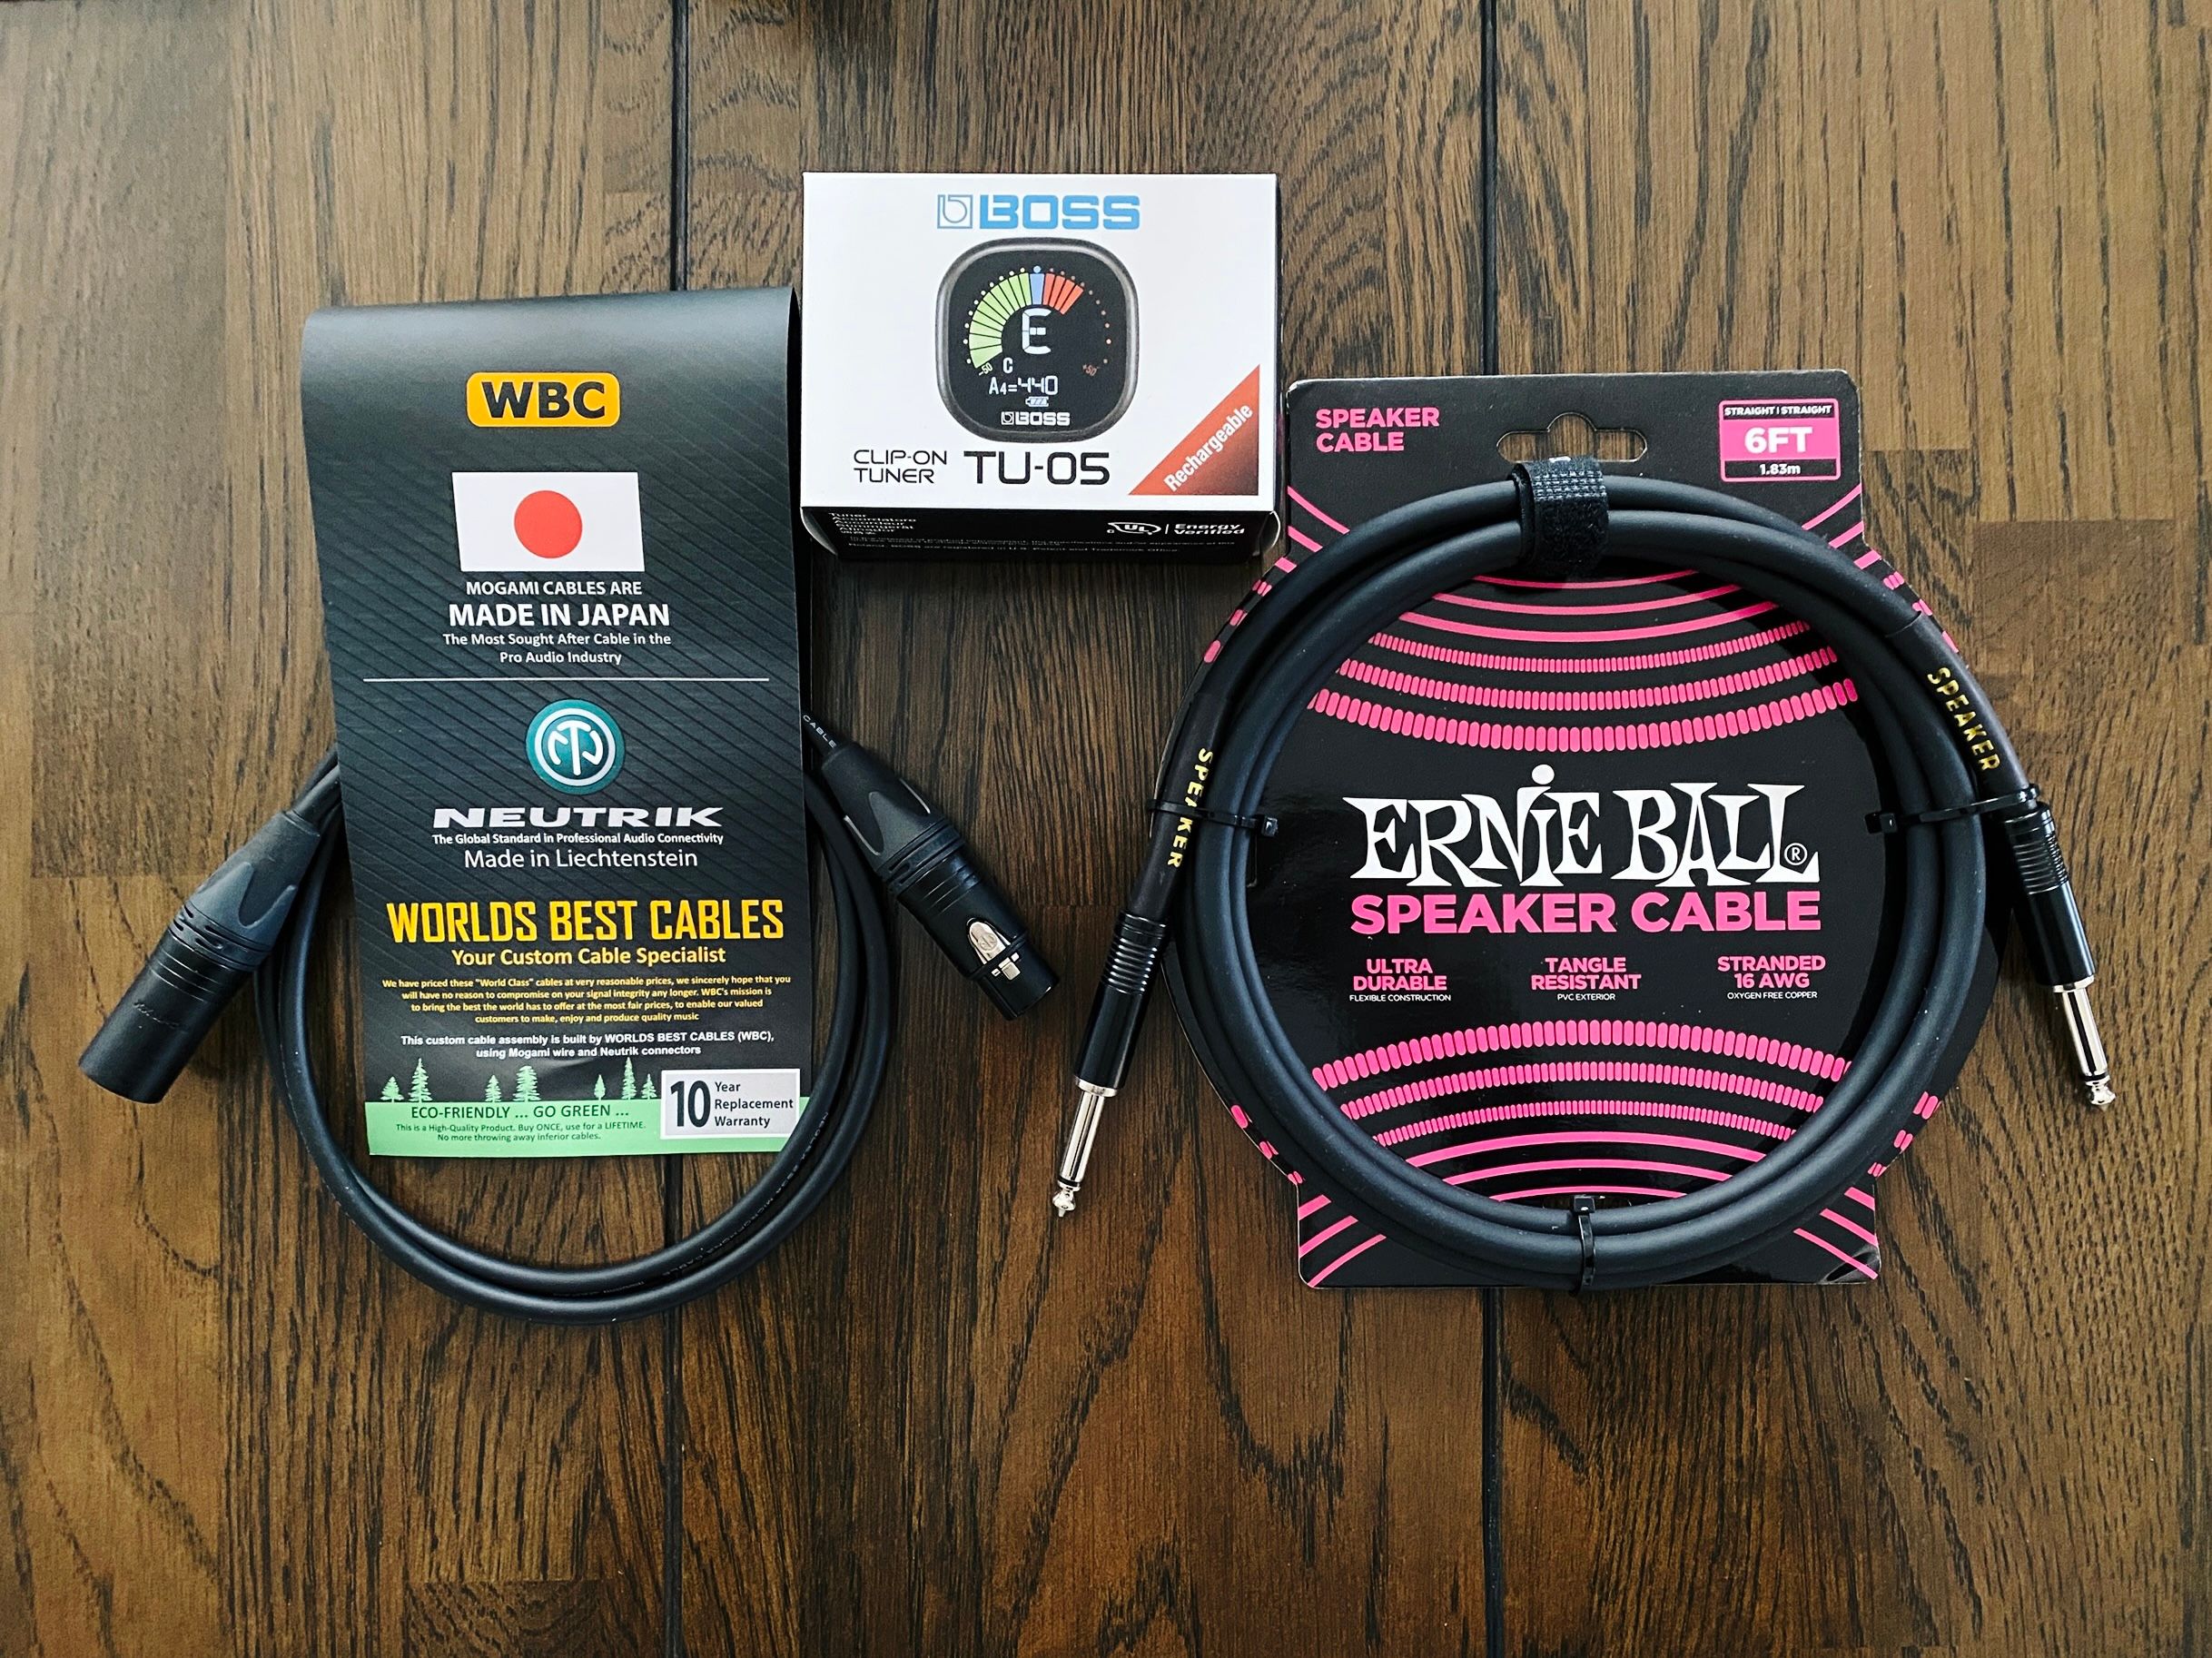 A photo of an Ernie Ball speaker cable (for hooking the guitar amp into the load box), a "World's Best Cables" XLR cable (for hooking the load box into the USB audio interface), and a Boss-brand digital tuner that clips onto the guitar headstock.